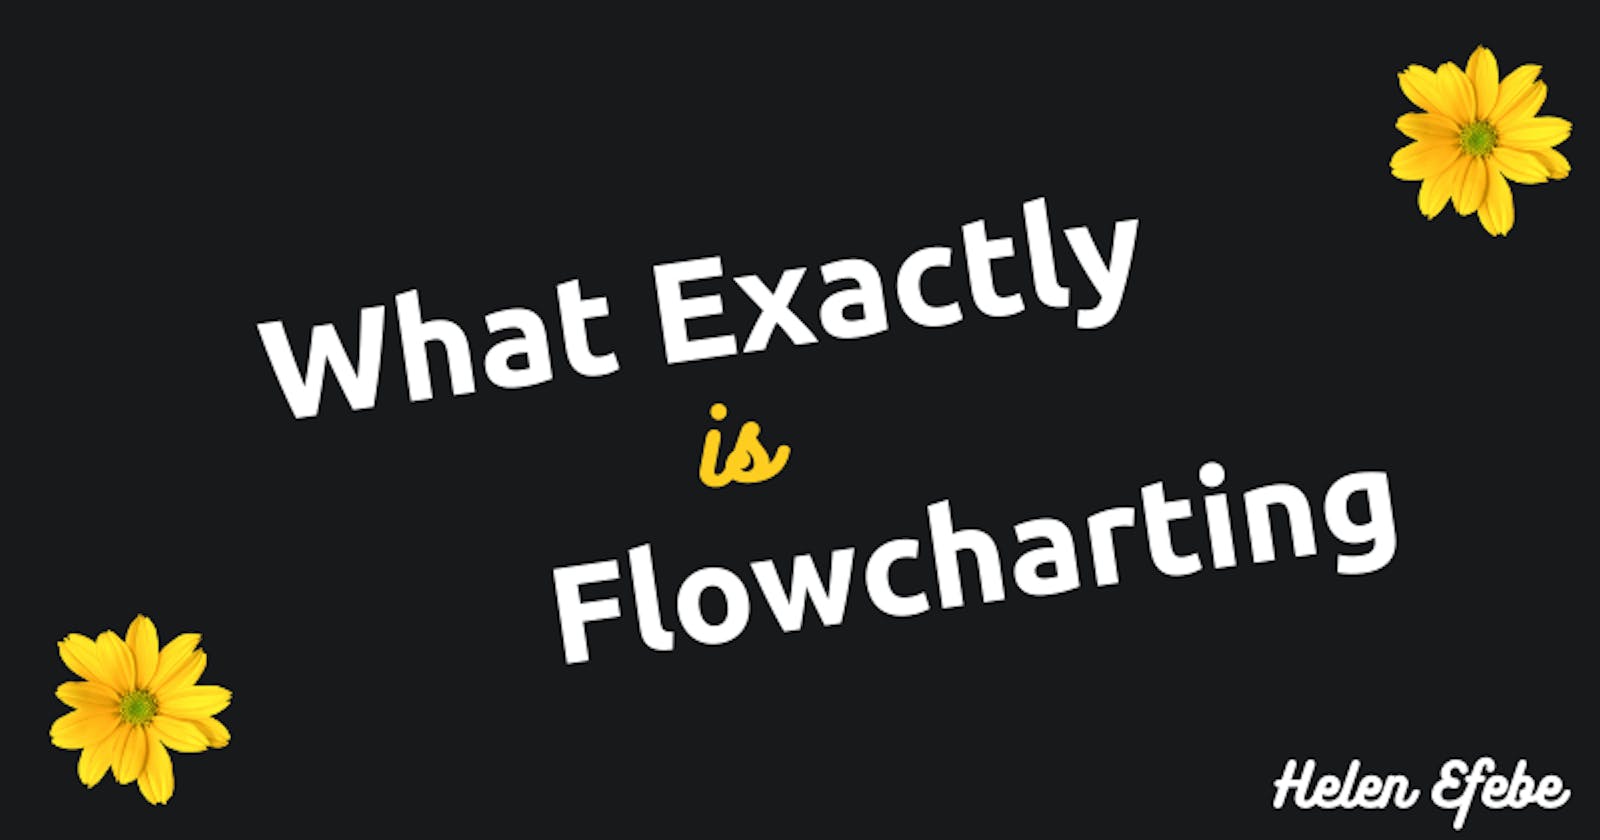 What Exactly is Flowcharting